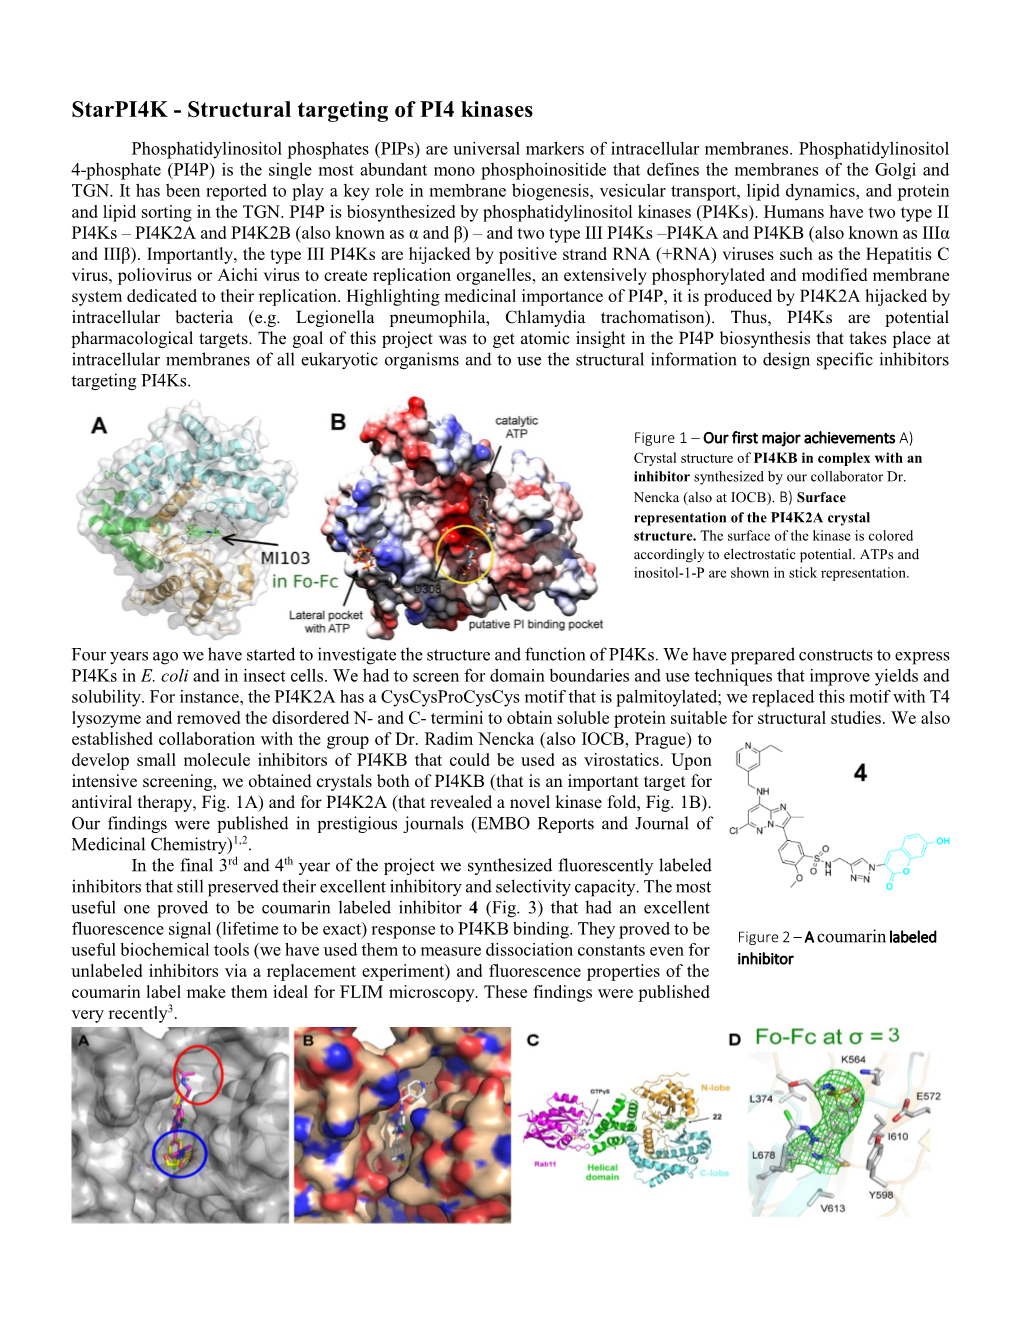 Structural Targeting of PI4 Kinases Phosphatidylinositol Phosphates (Pips) Are Universal Markers of Intracellular Membranes